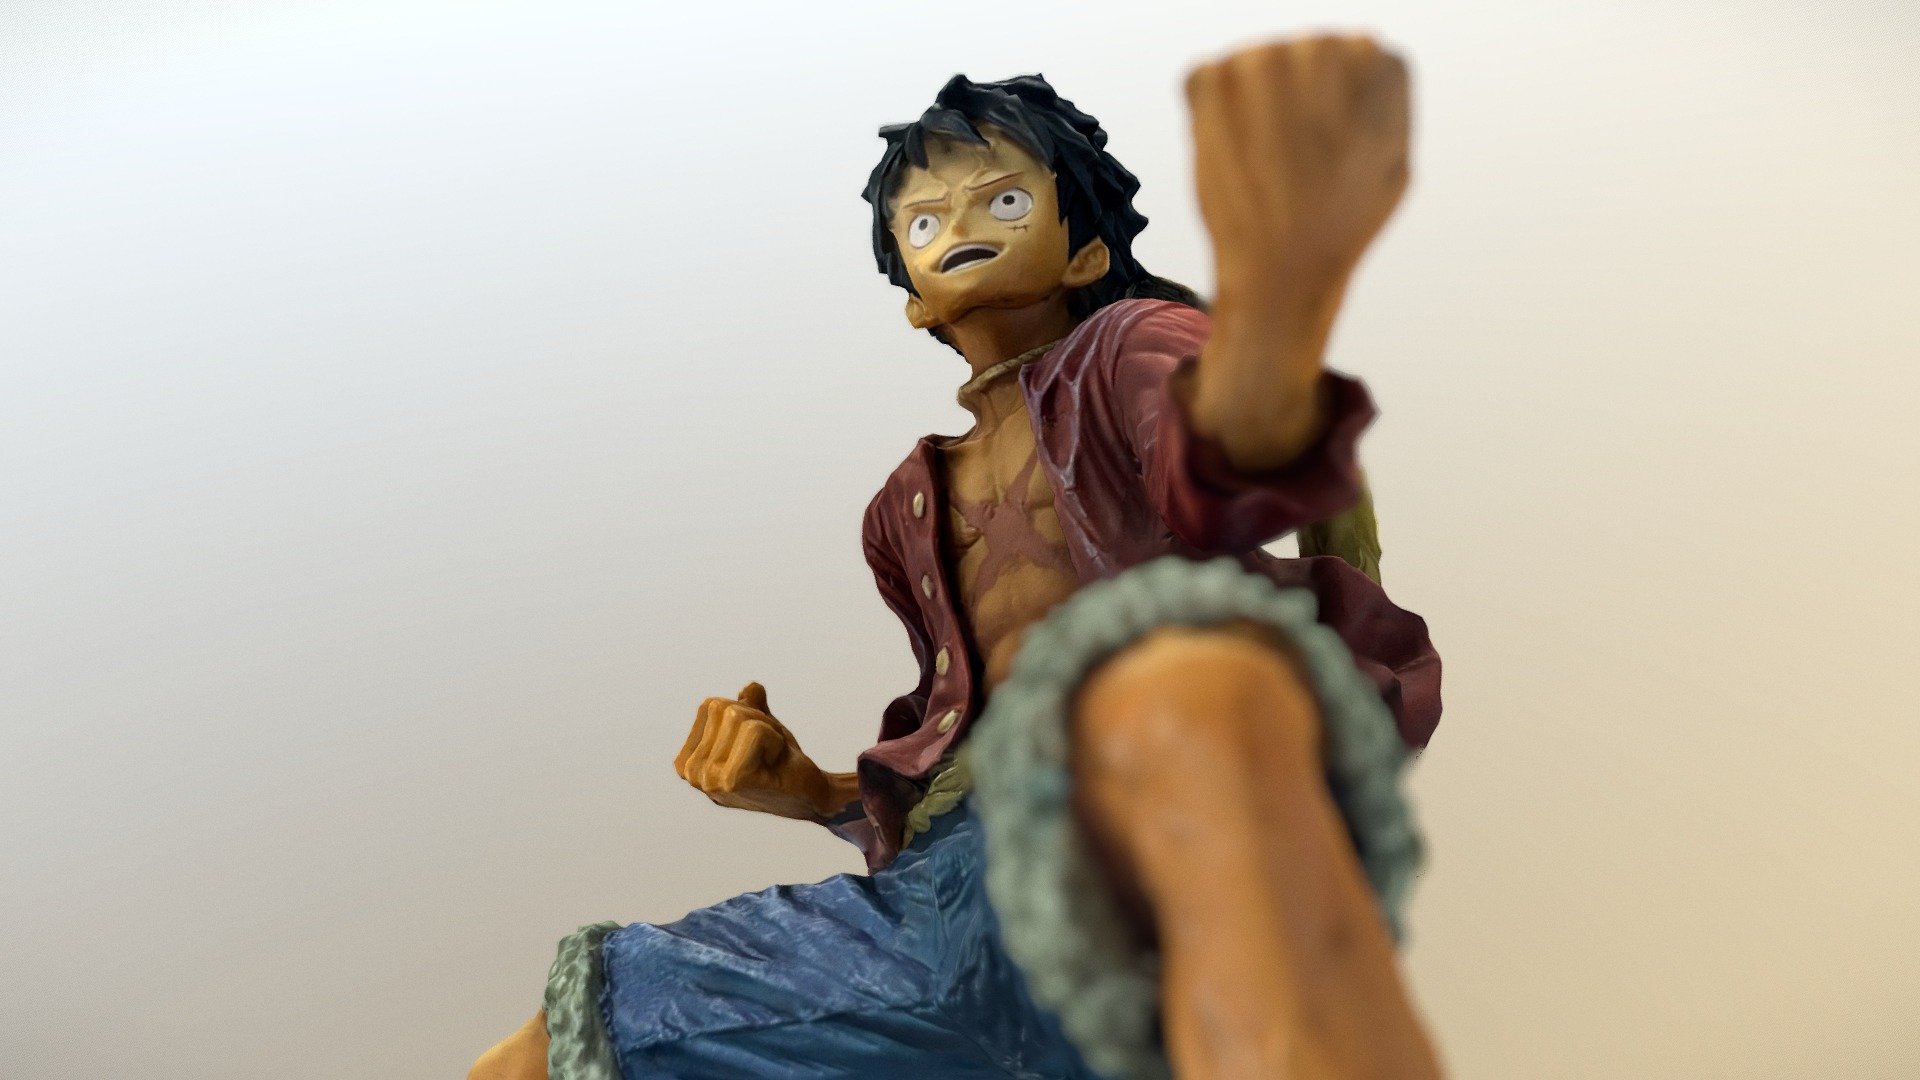 Monkey D. Luffy is a fictional character and the main protagonist of the anime and manga One Piece created by Eiichirō Oda. His body is made of rubber after eating a devil fruit, specifically the &ldquo;Gomu Gomu fruit